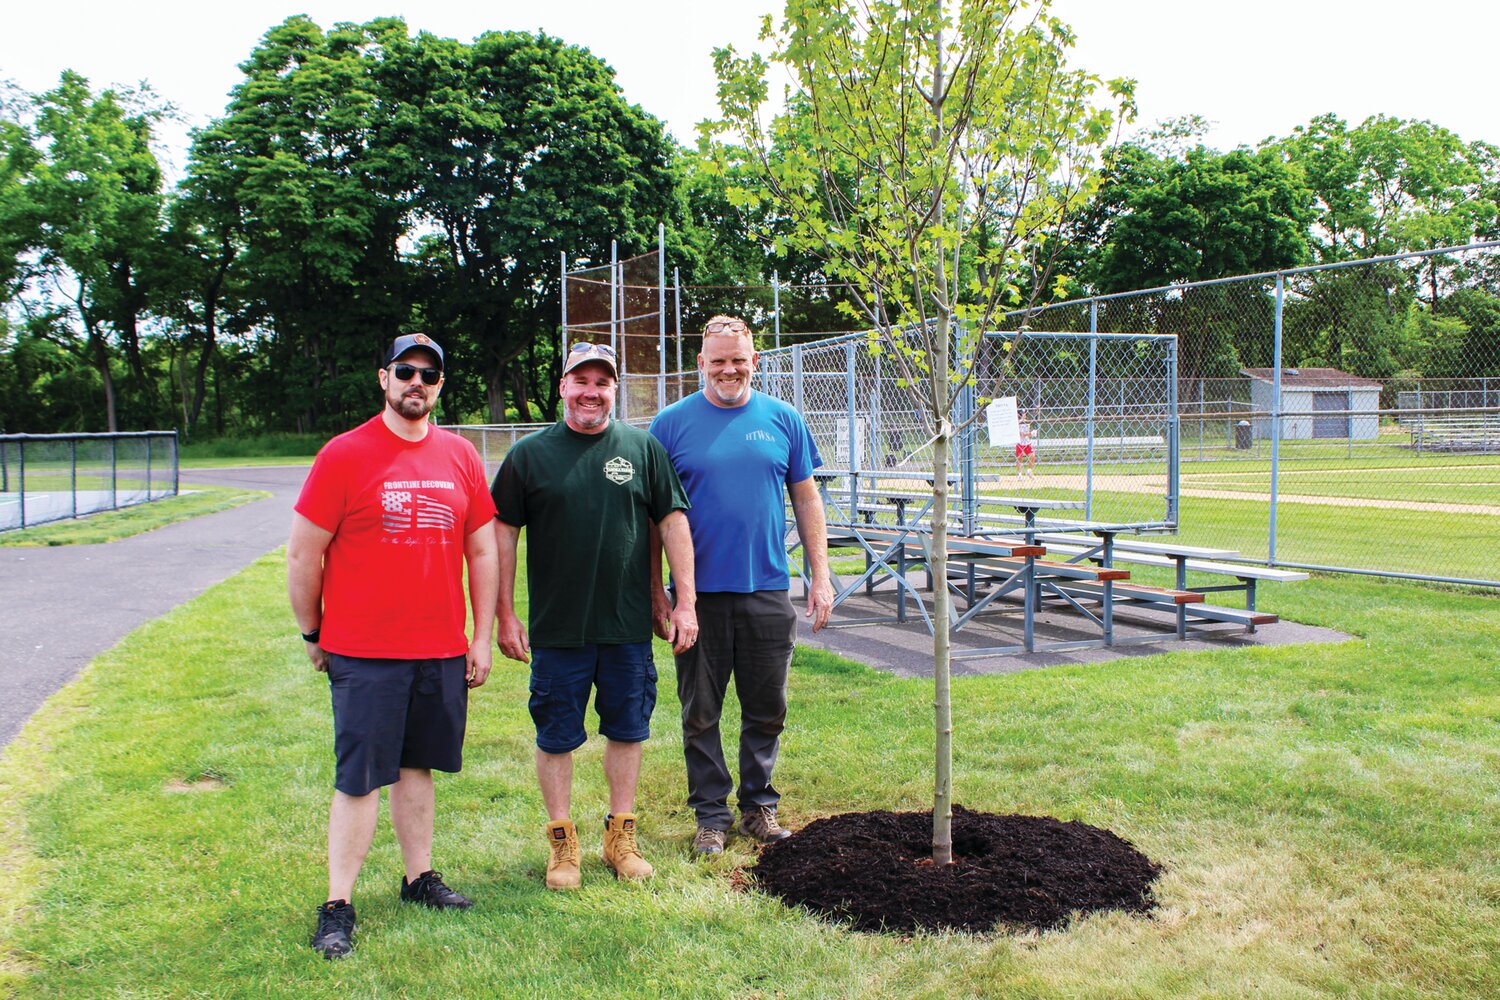 **** Hilltown Township Supervisors Joe Metzinger, Caleb Torrice and Jim Groff stand next to one of the trees planted in Hilltown Civic Park.